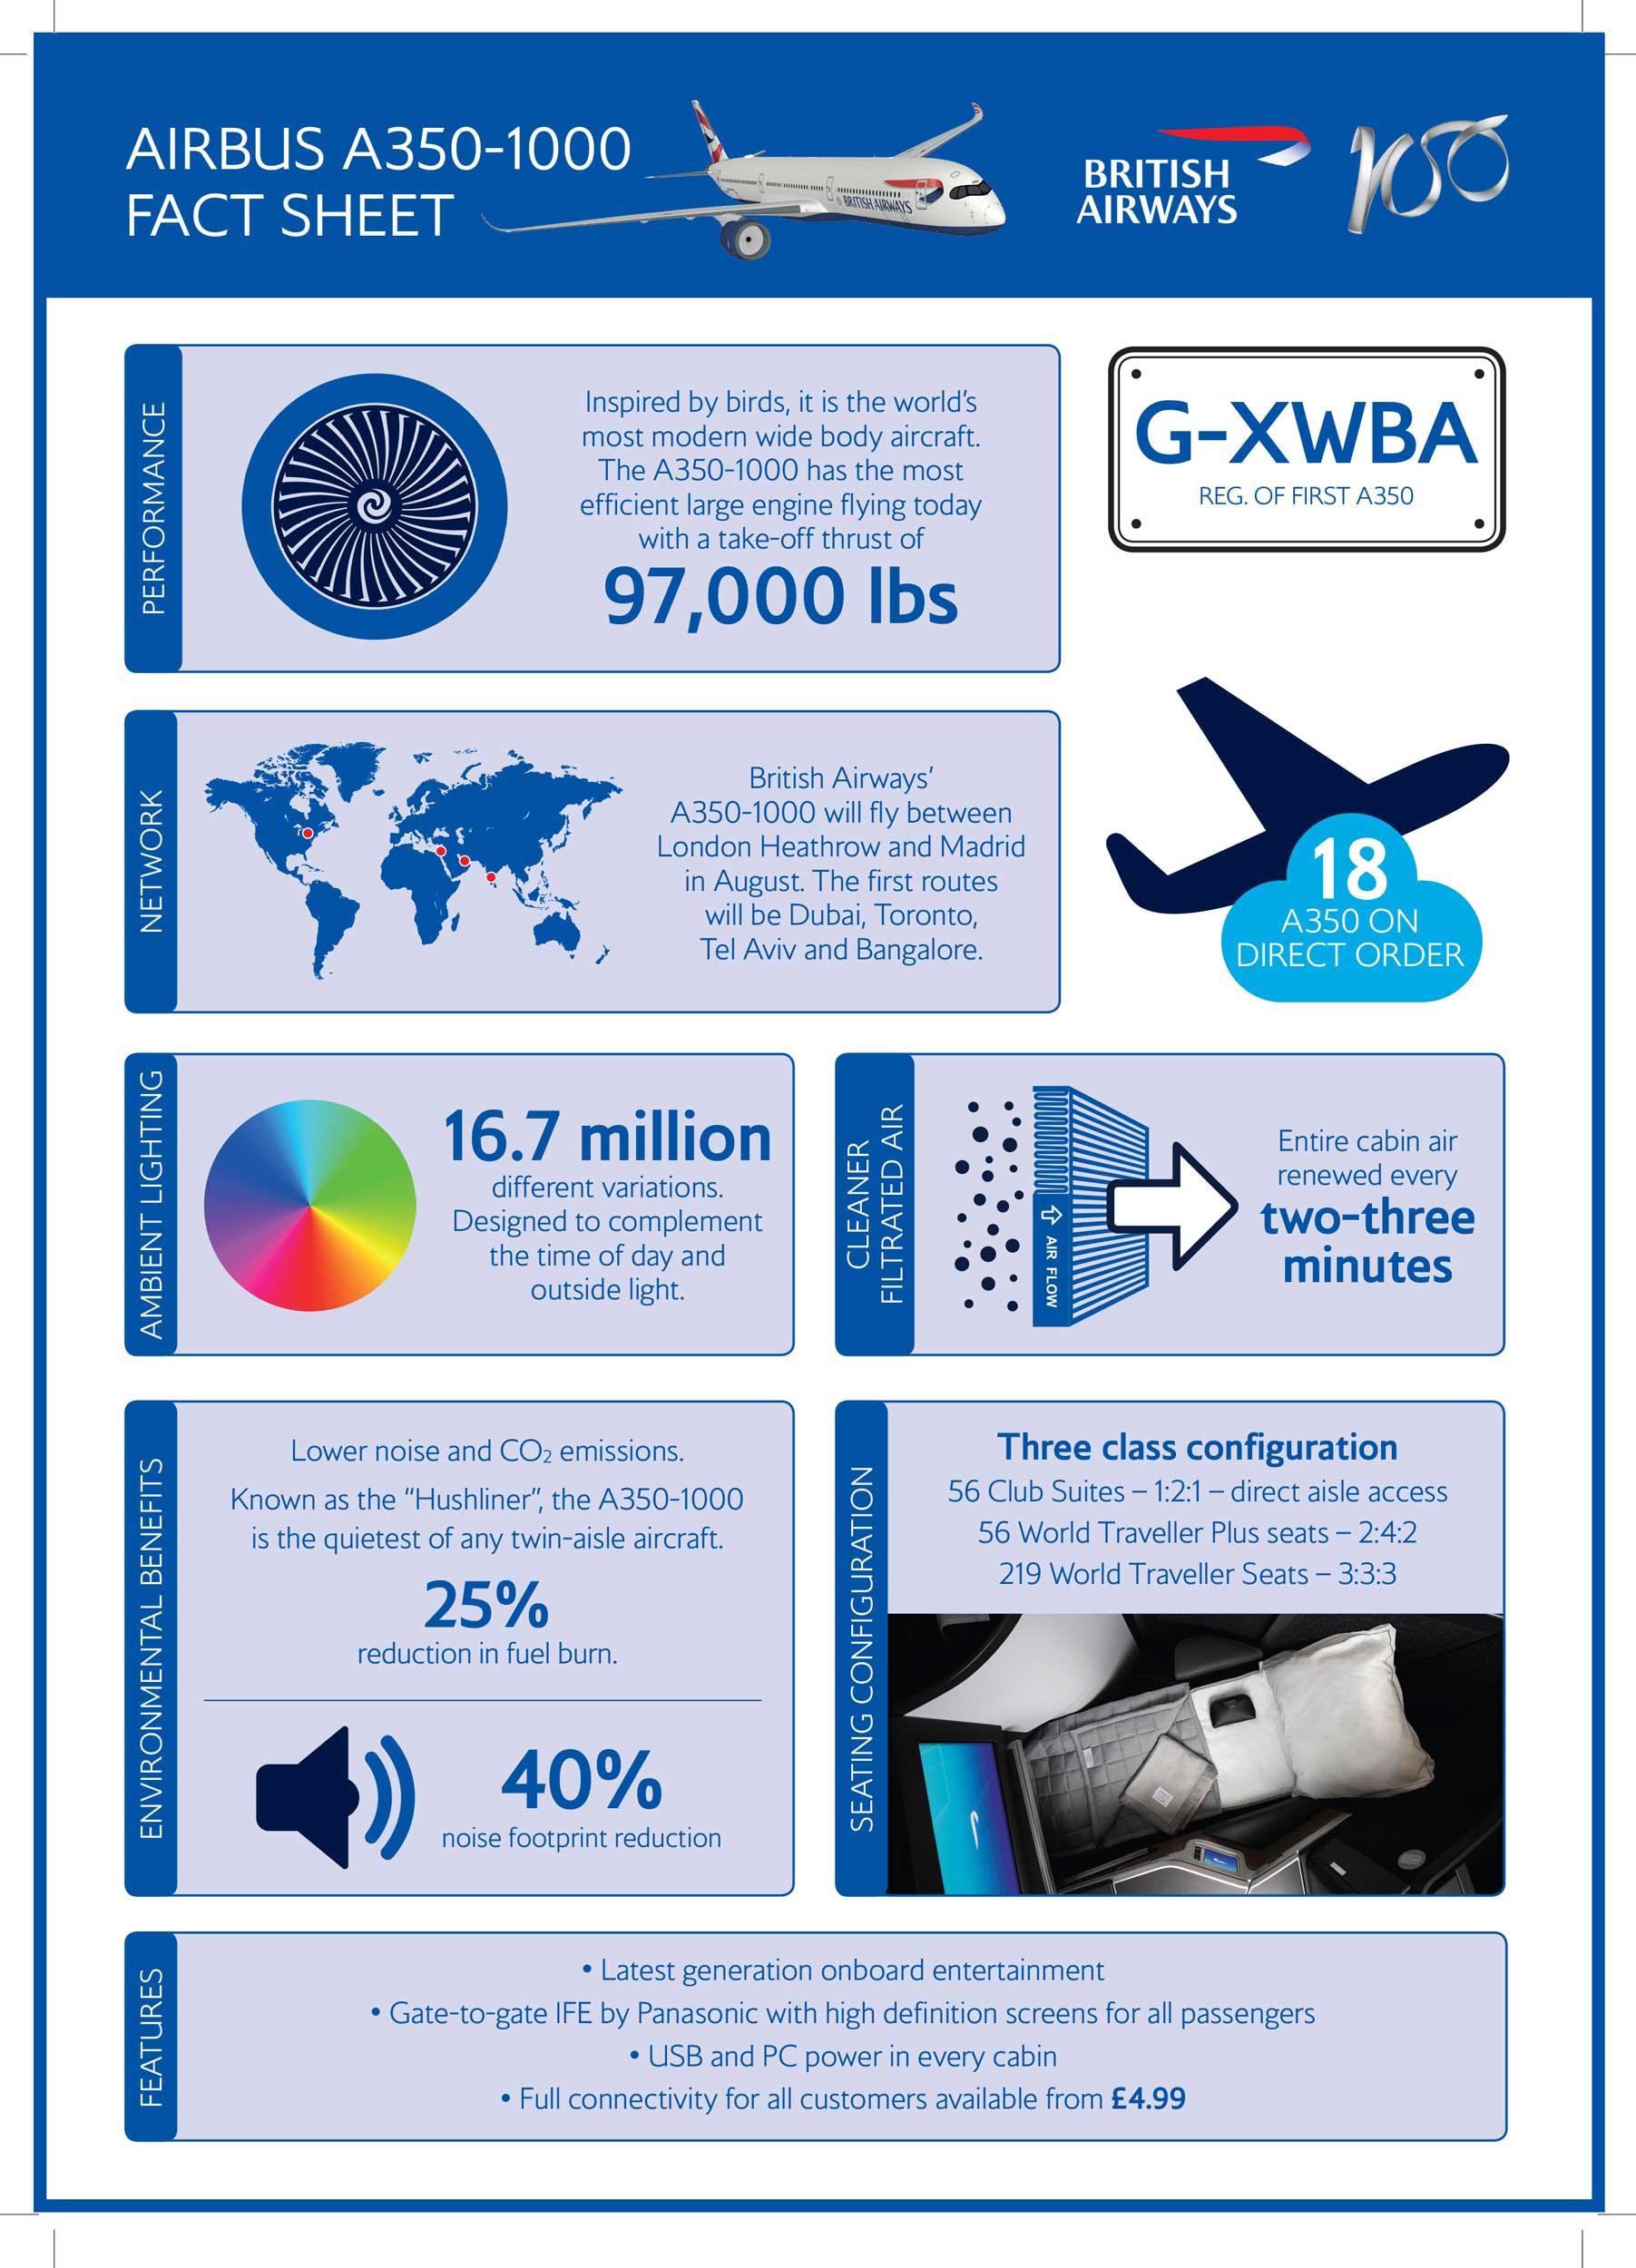 A350 infographic